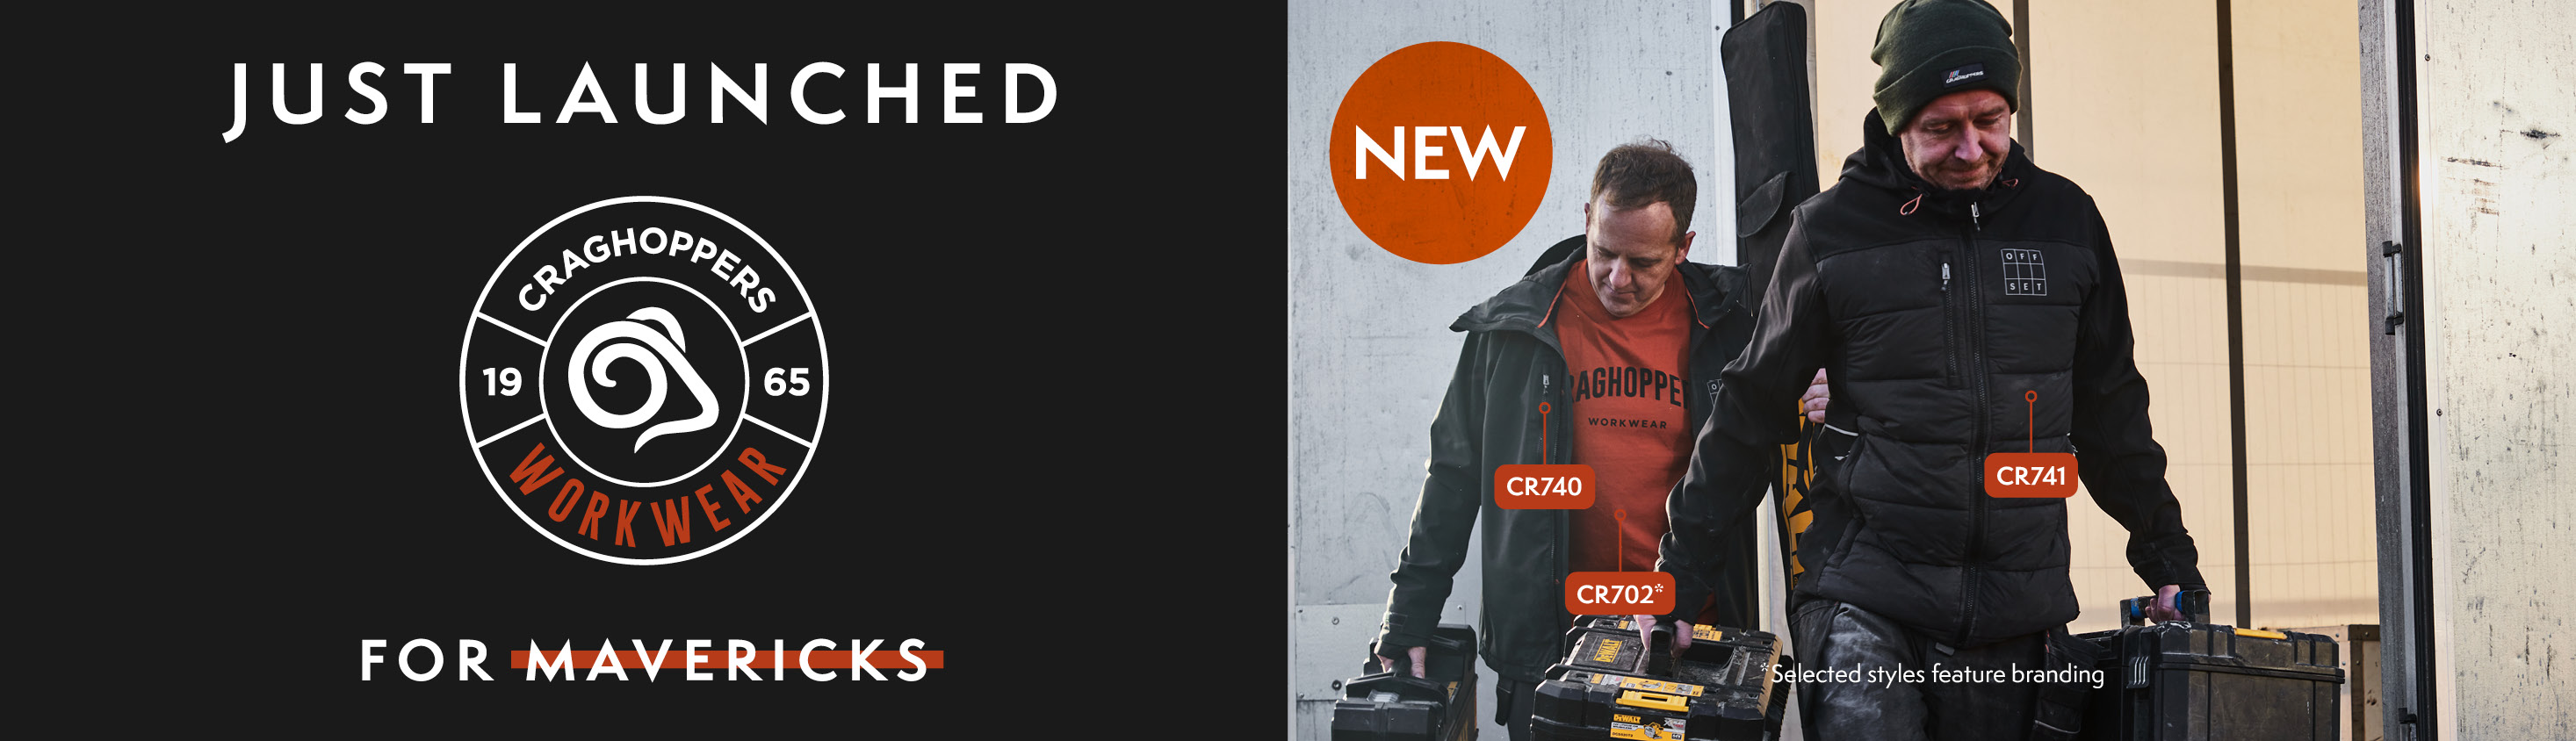 NEW! Craghoppers Workwear